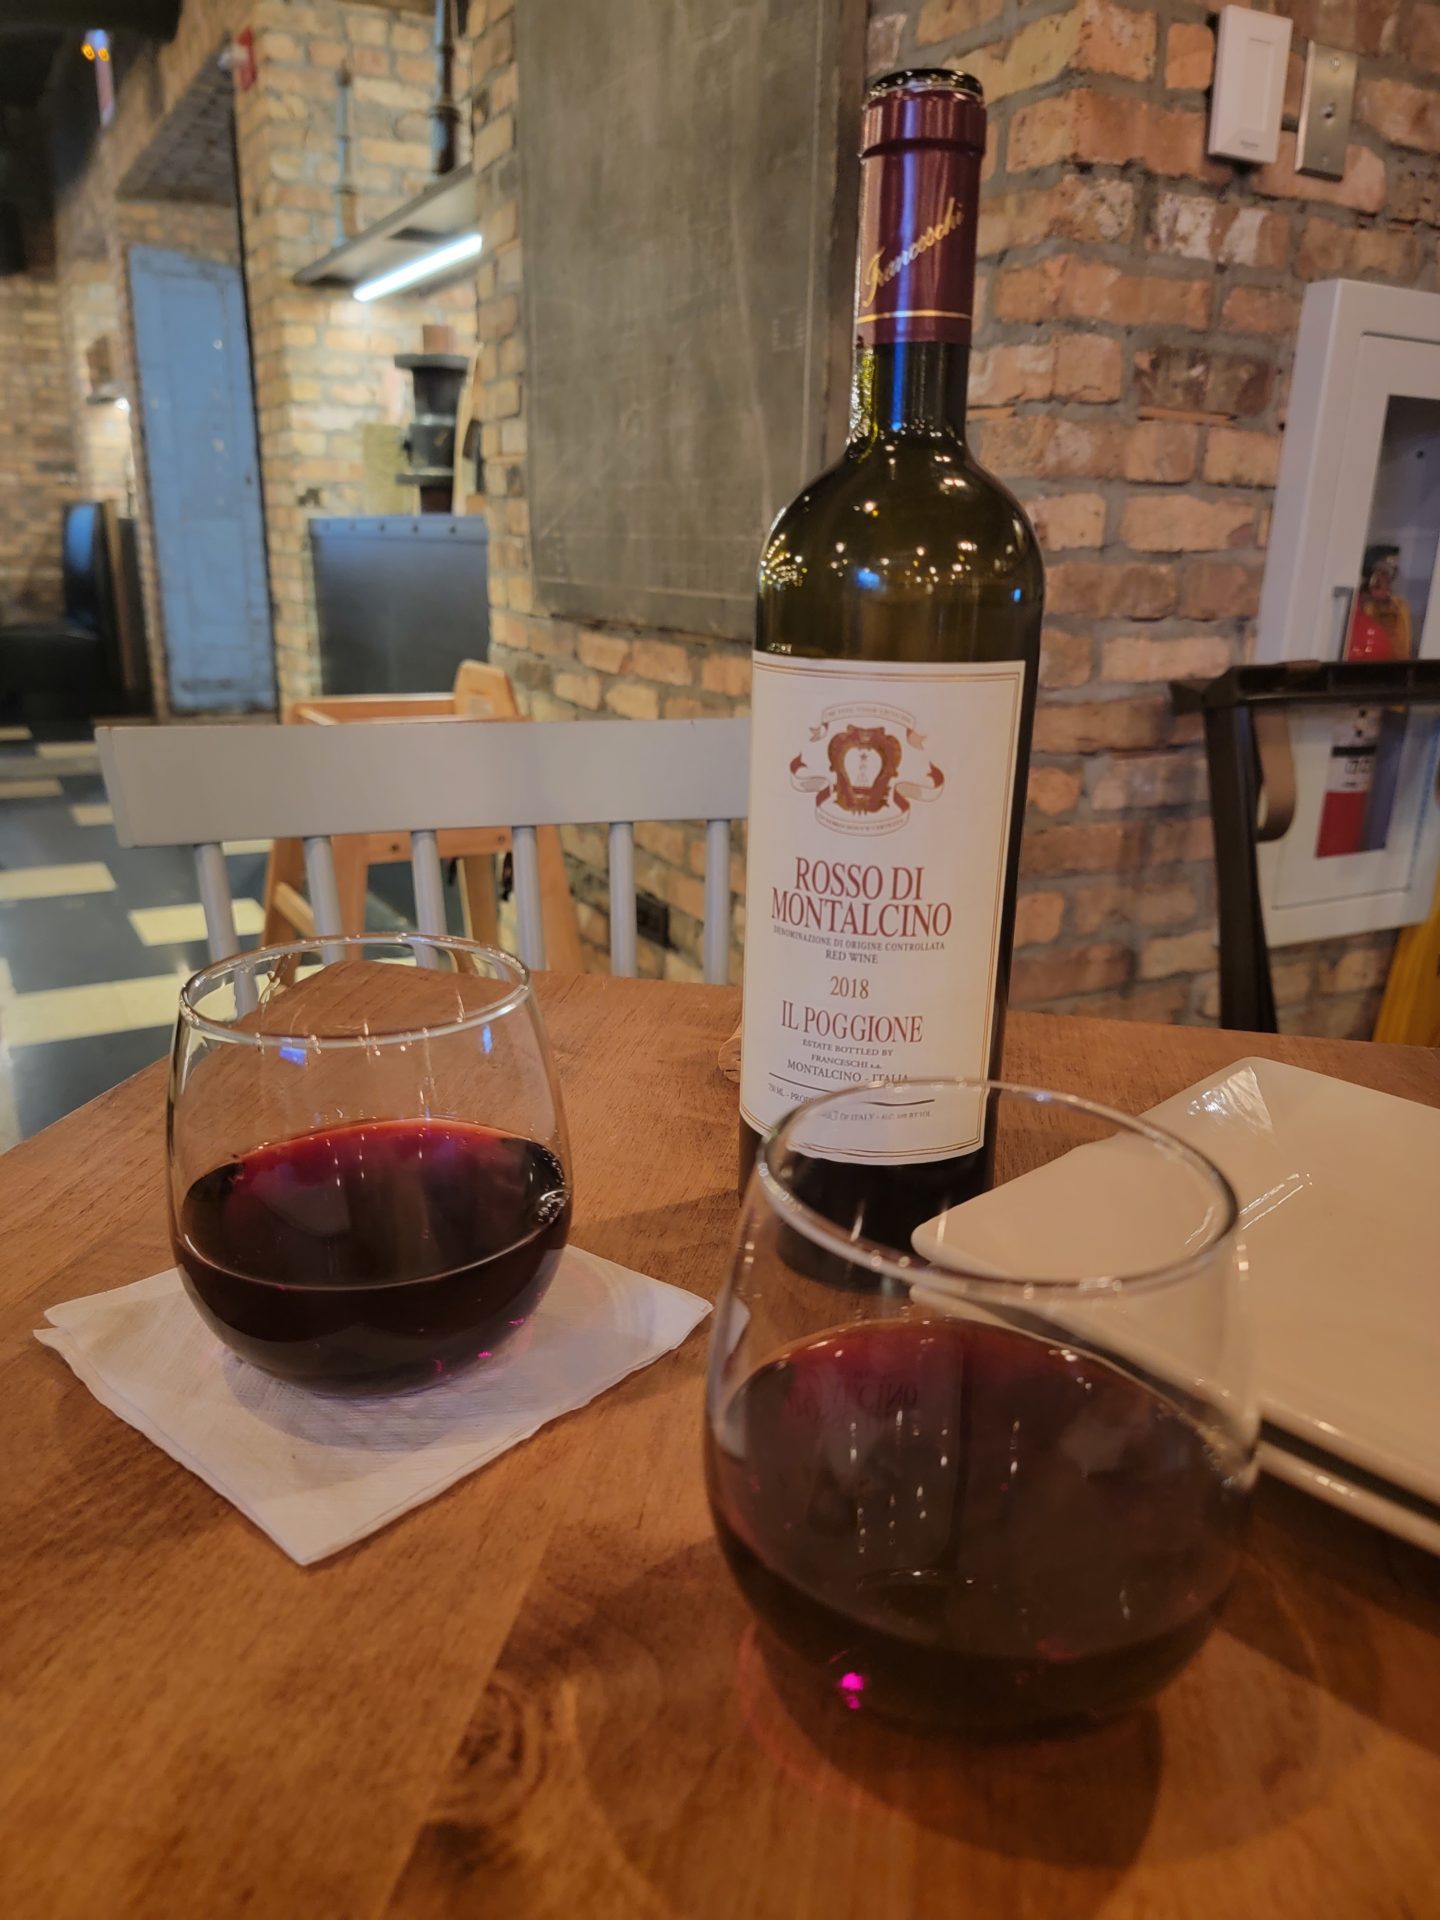 a bottle of wine and two glasses of wine on a table